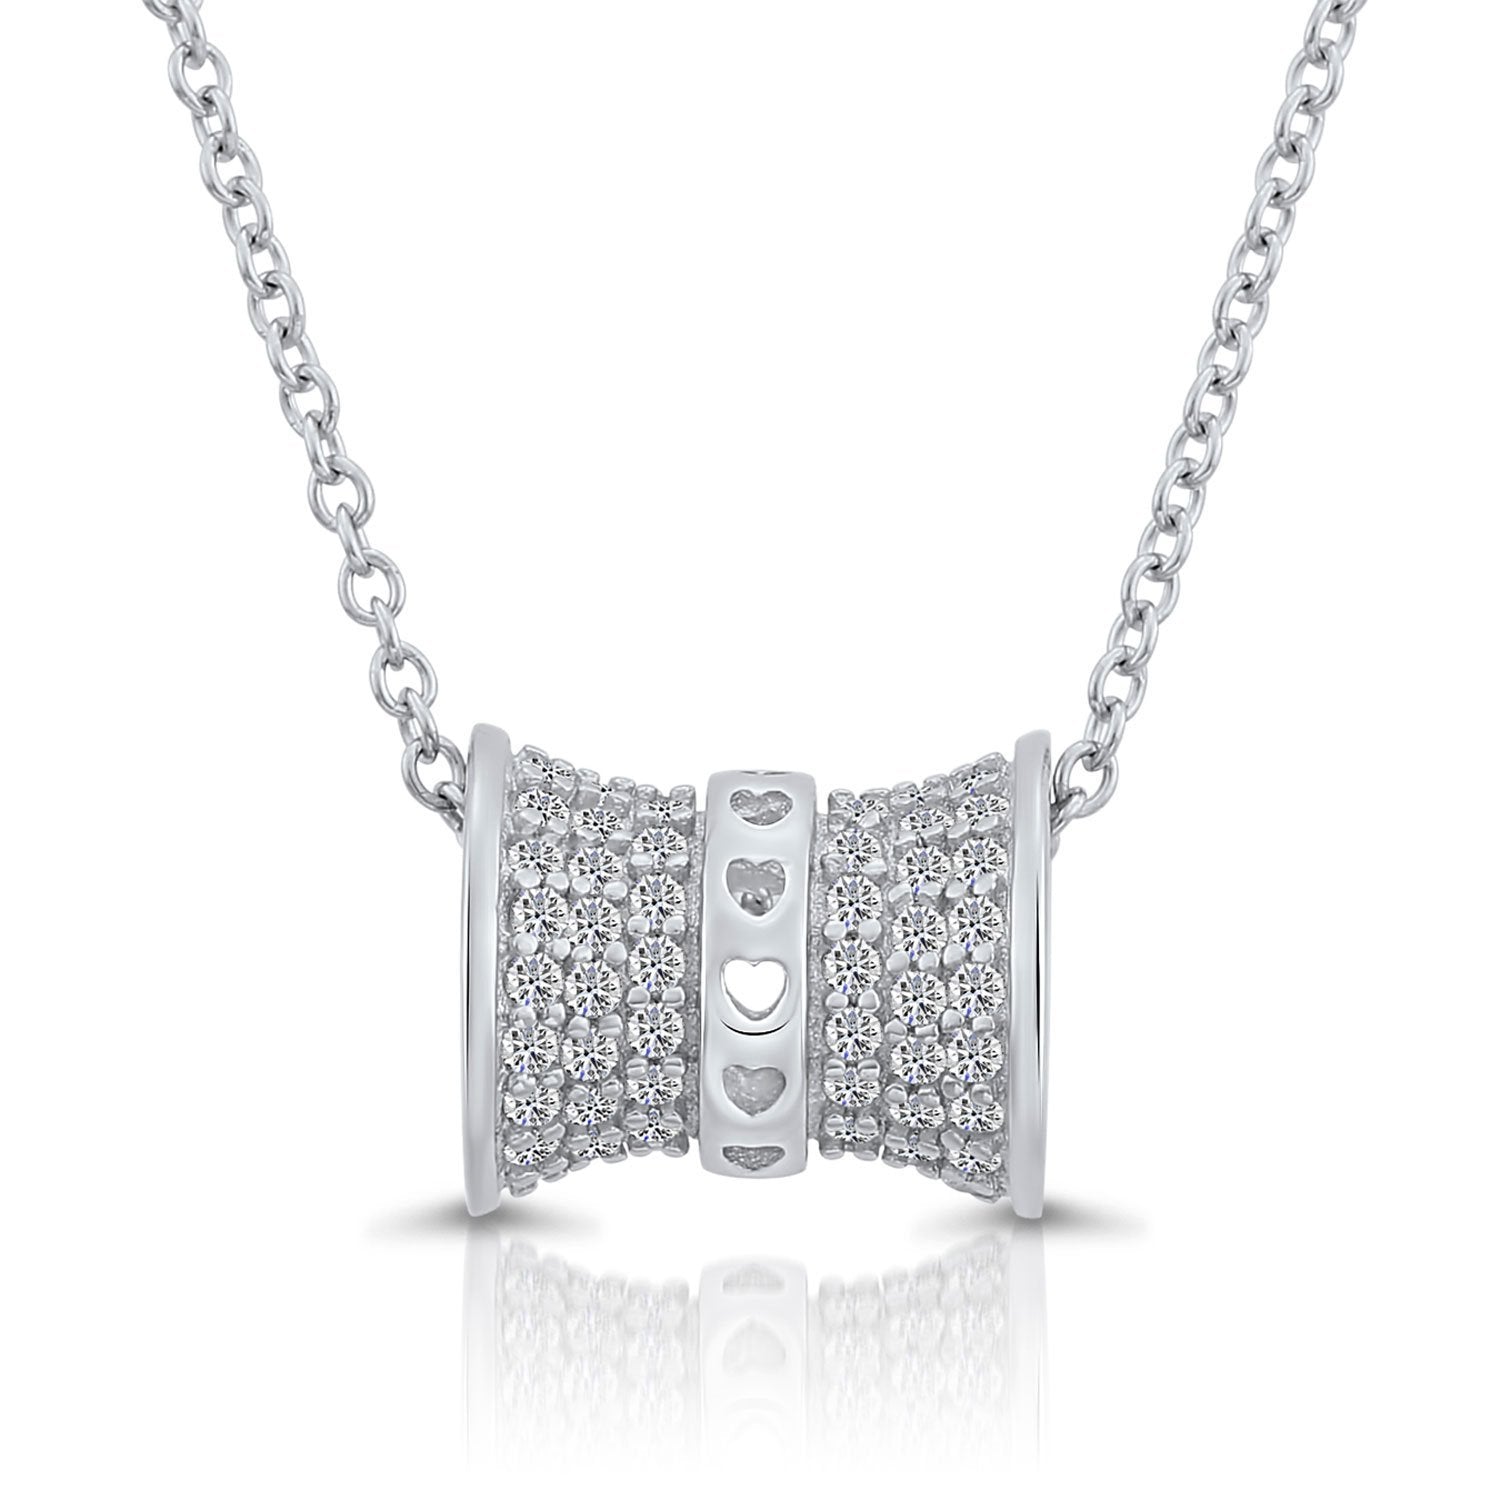 CZ Love Barrel Charm Necklace in Sterling Silver